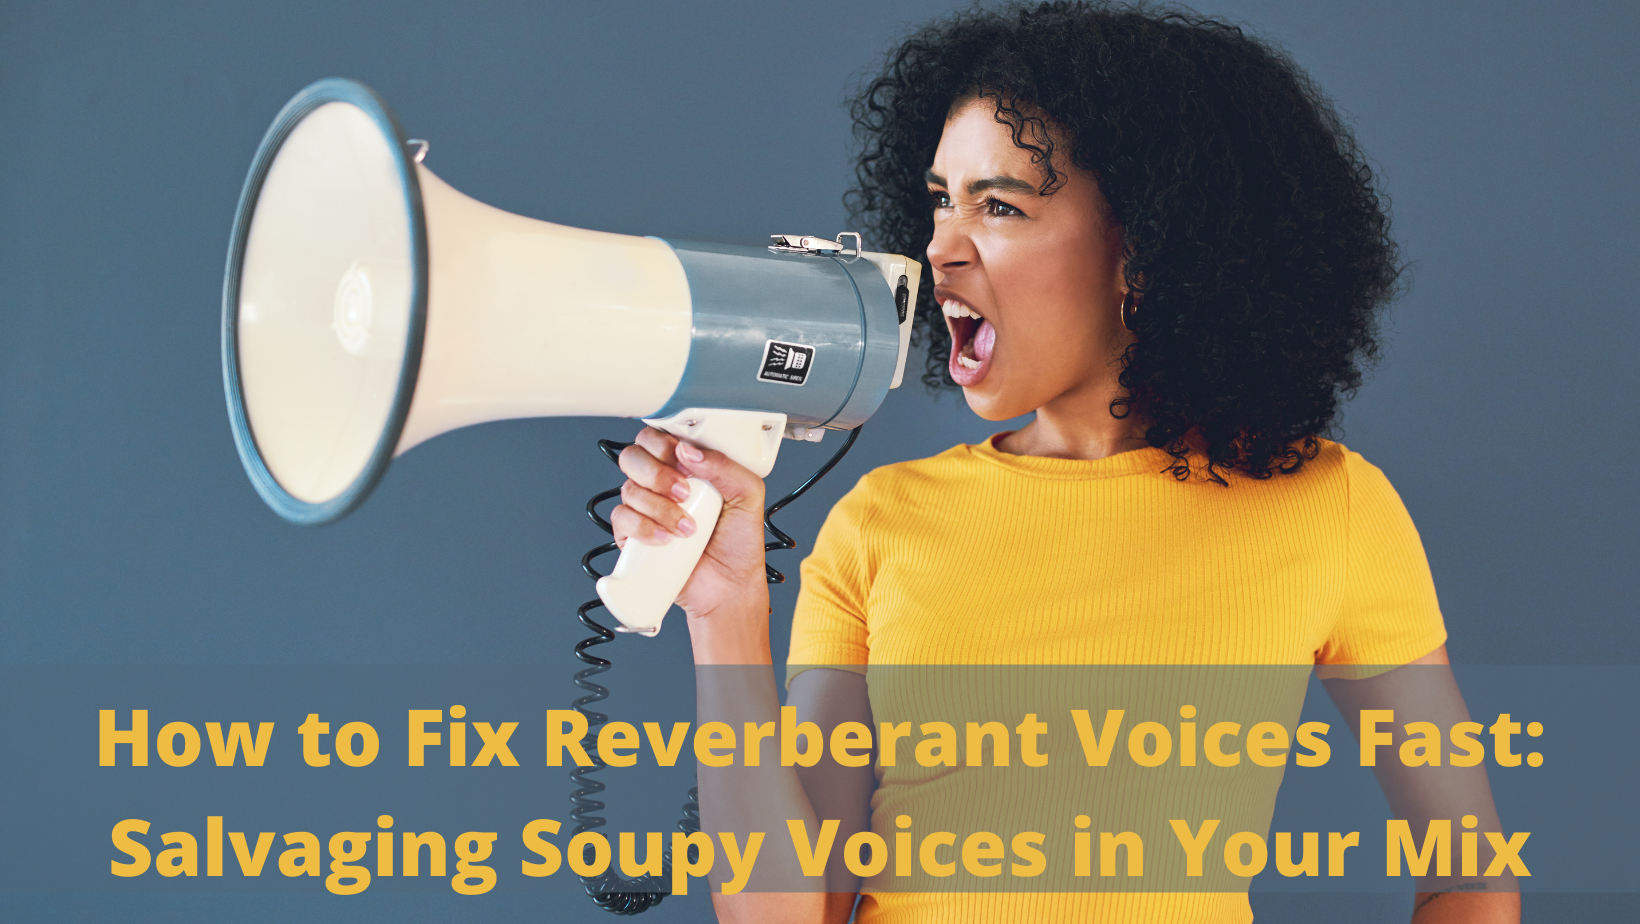 How to Fix Reverberant Voices Fast Salvaging Soupy Voices in Your